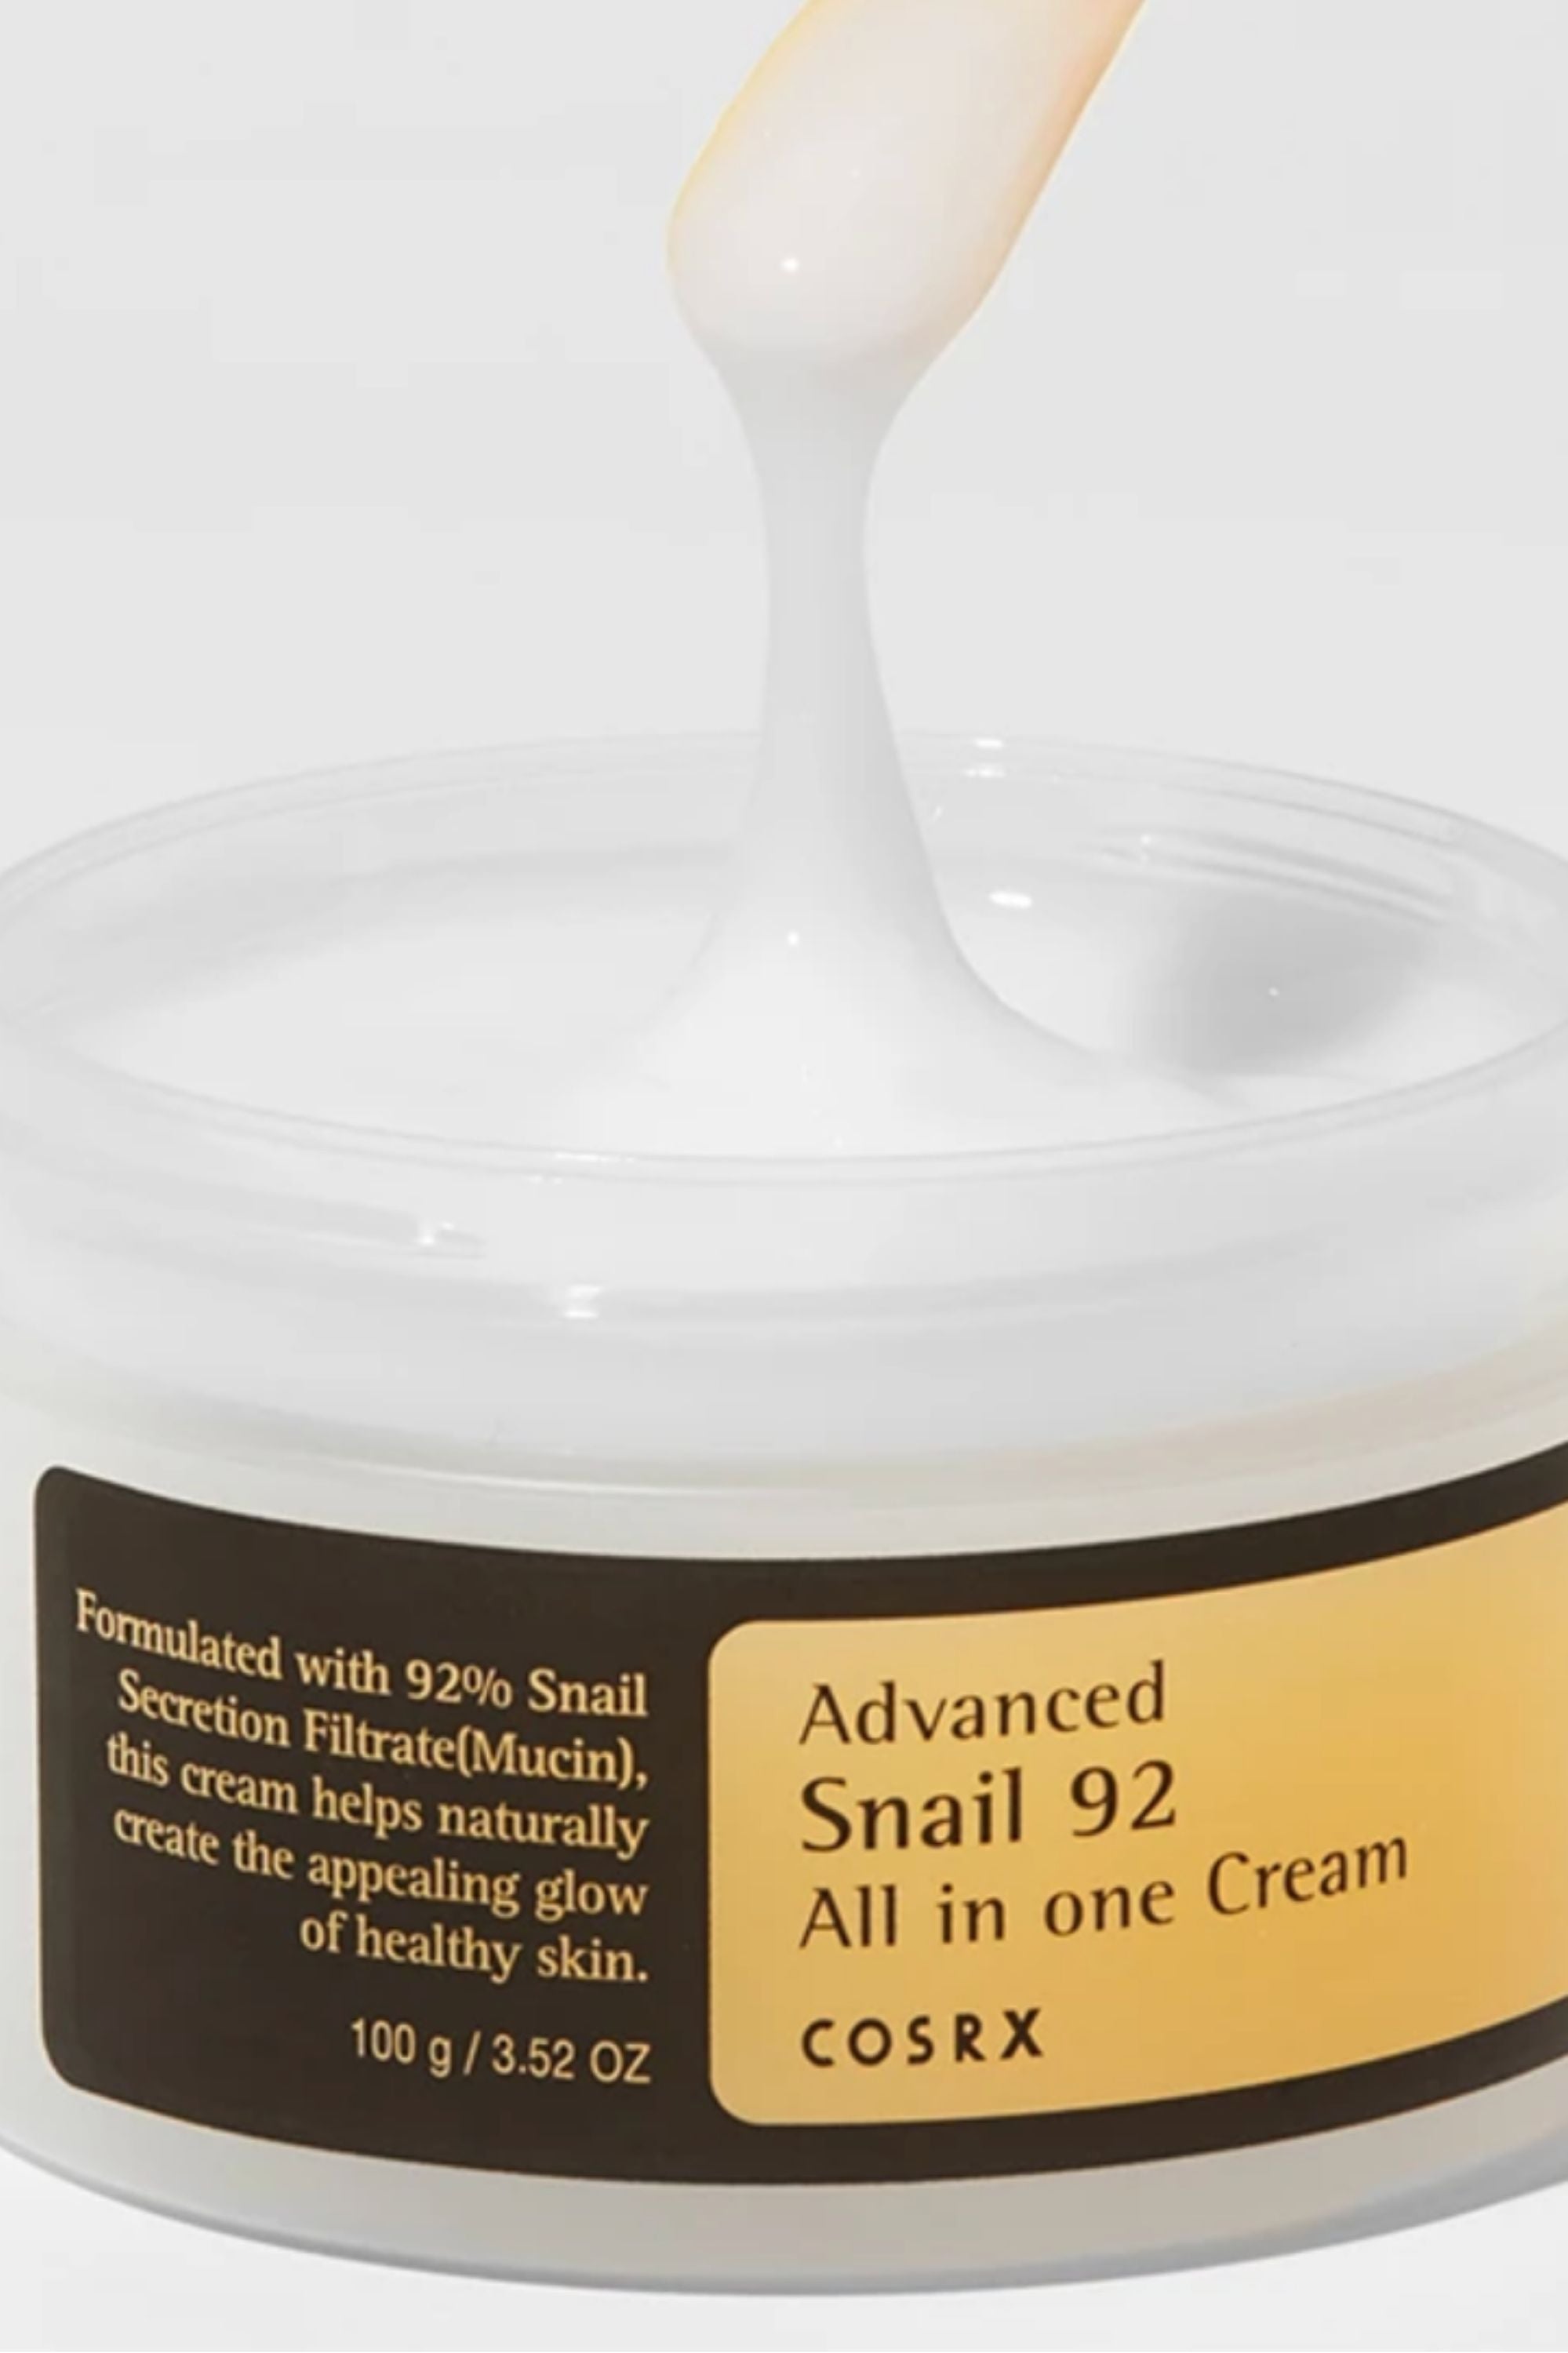 COSRX - Advanced Snail 92 All In One Cream - 100g | Afterpay available â Kanvas Beauty Australia